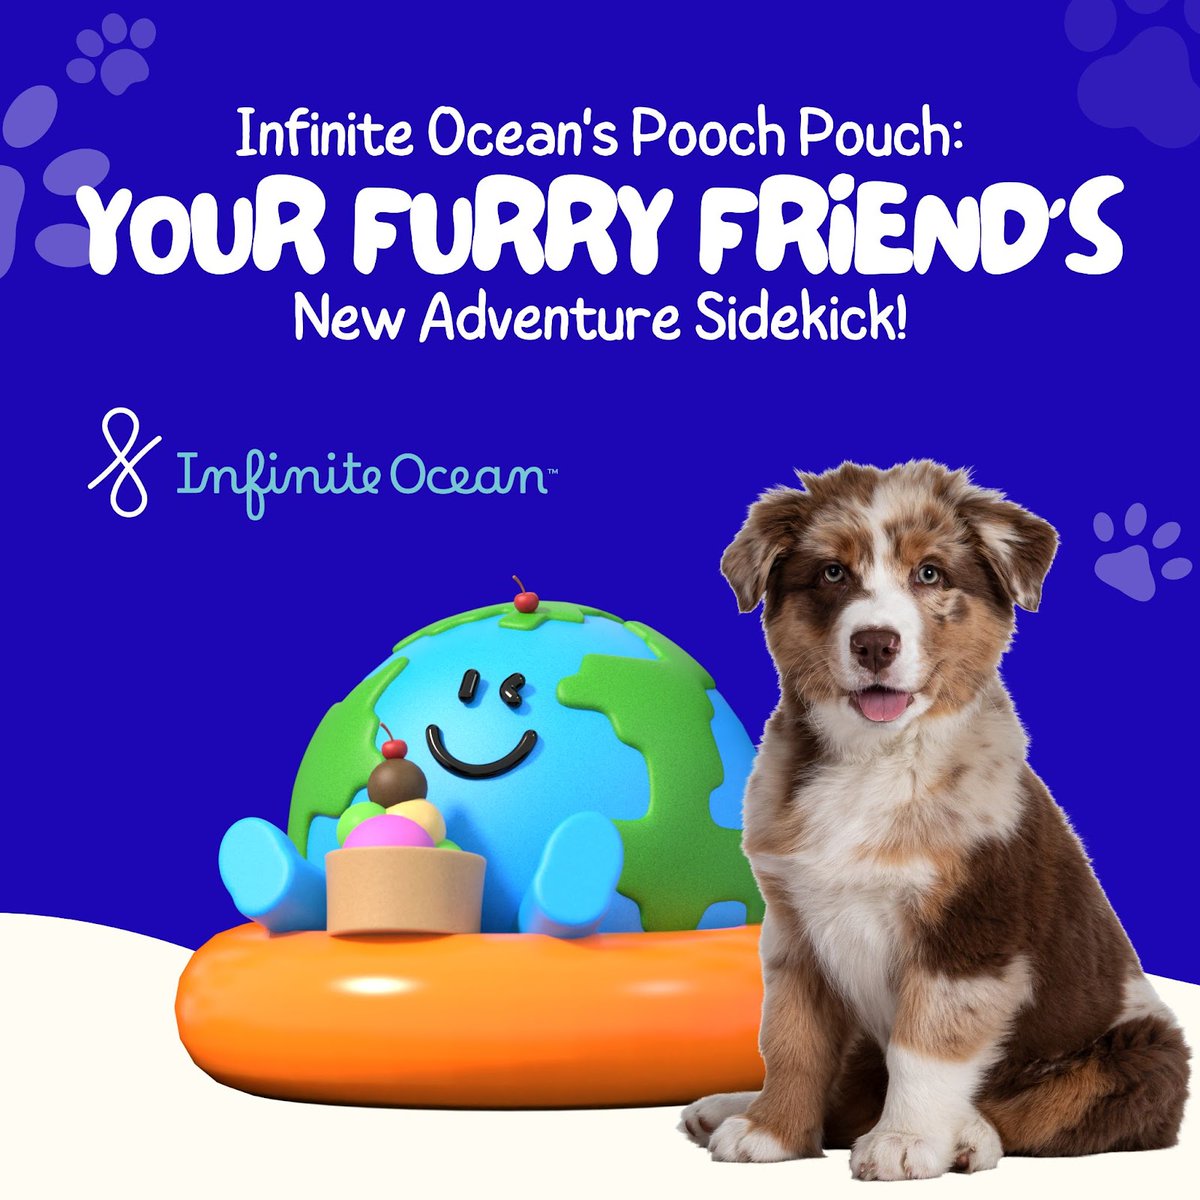 Tired of juggling bulky bags on your walks? Say goodbye to the hassle and hello to convenience with our Pooch Pouch! 
.
DM us for more details.
.
#InfiniteOcean #RecycledDogBags #CleanerWorld #SmallSteps #DogWasteSolutions